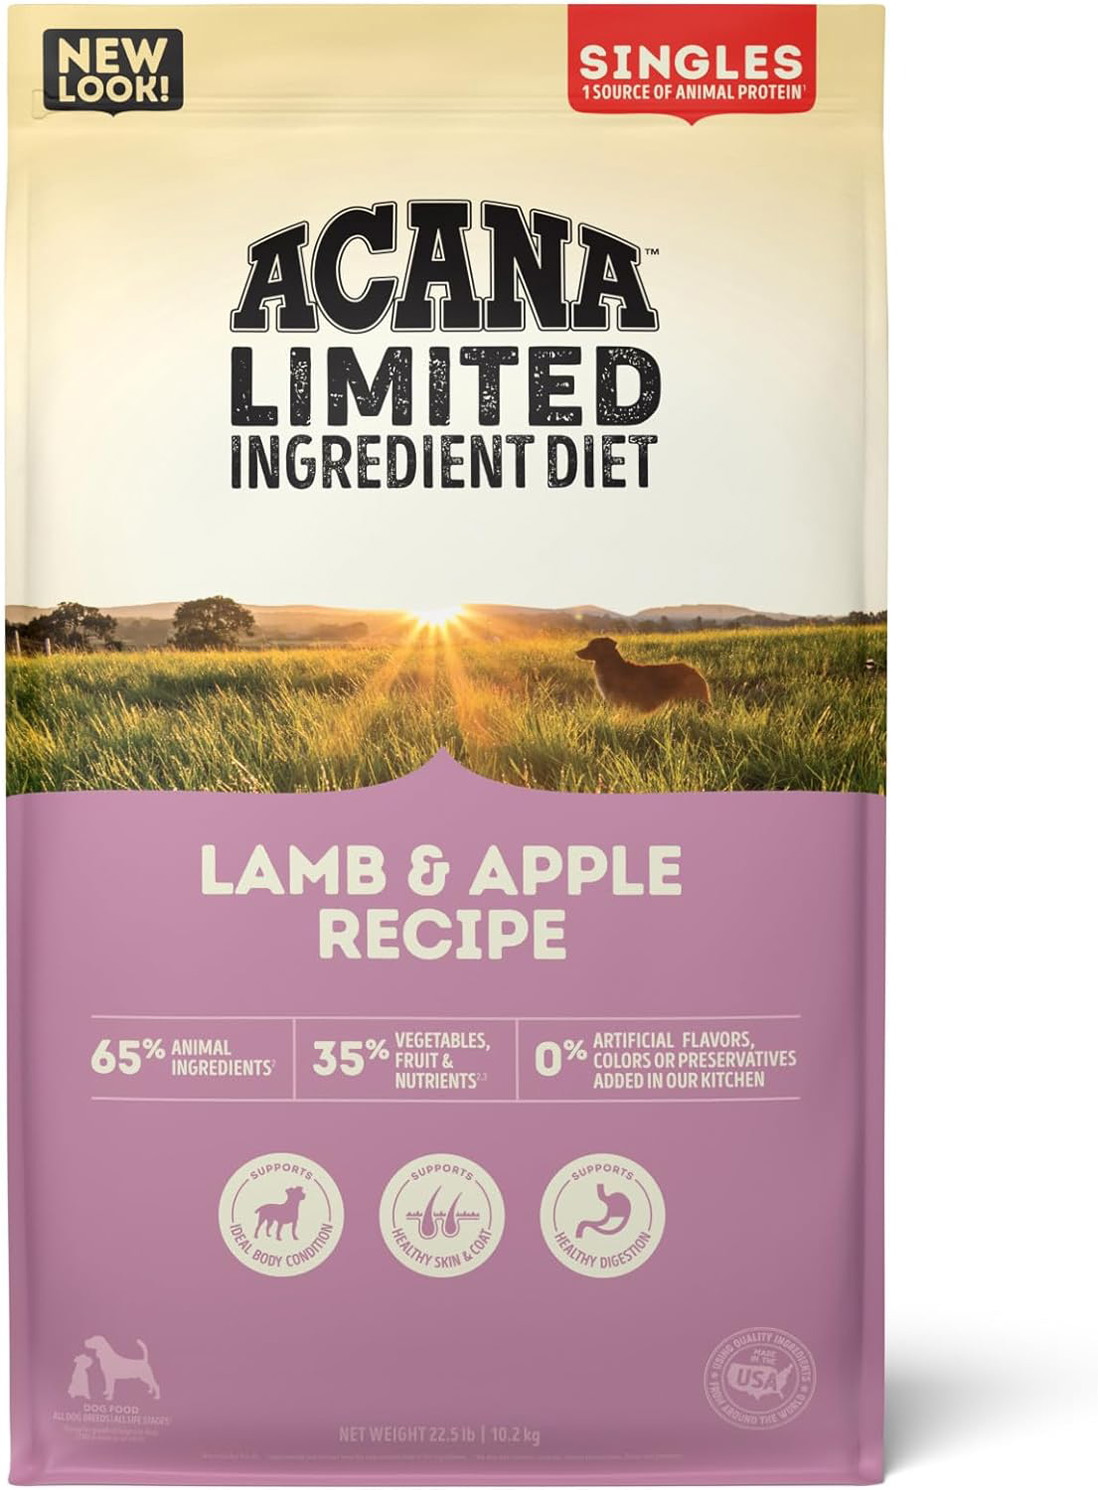 ACANA Grain Free, Singles Limited Ingredient, High Protein, Lamb & Apple Dry Dog Food